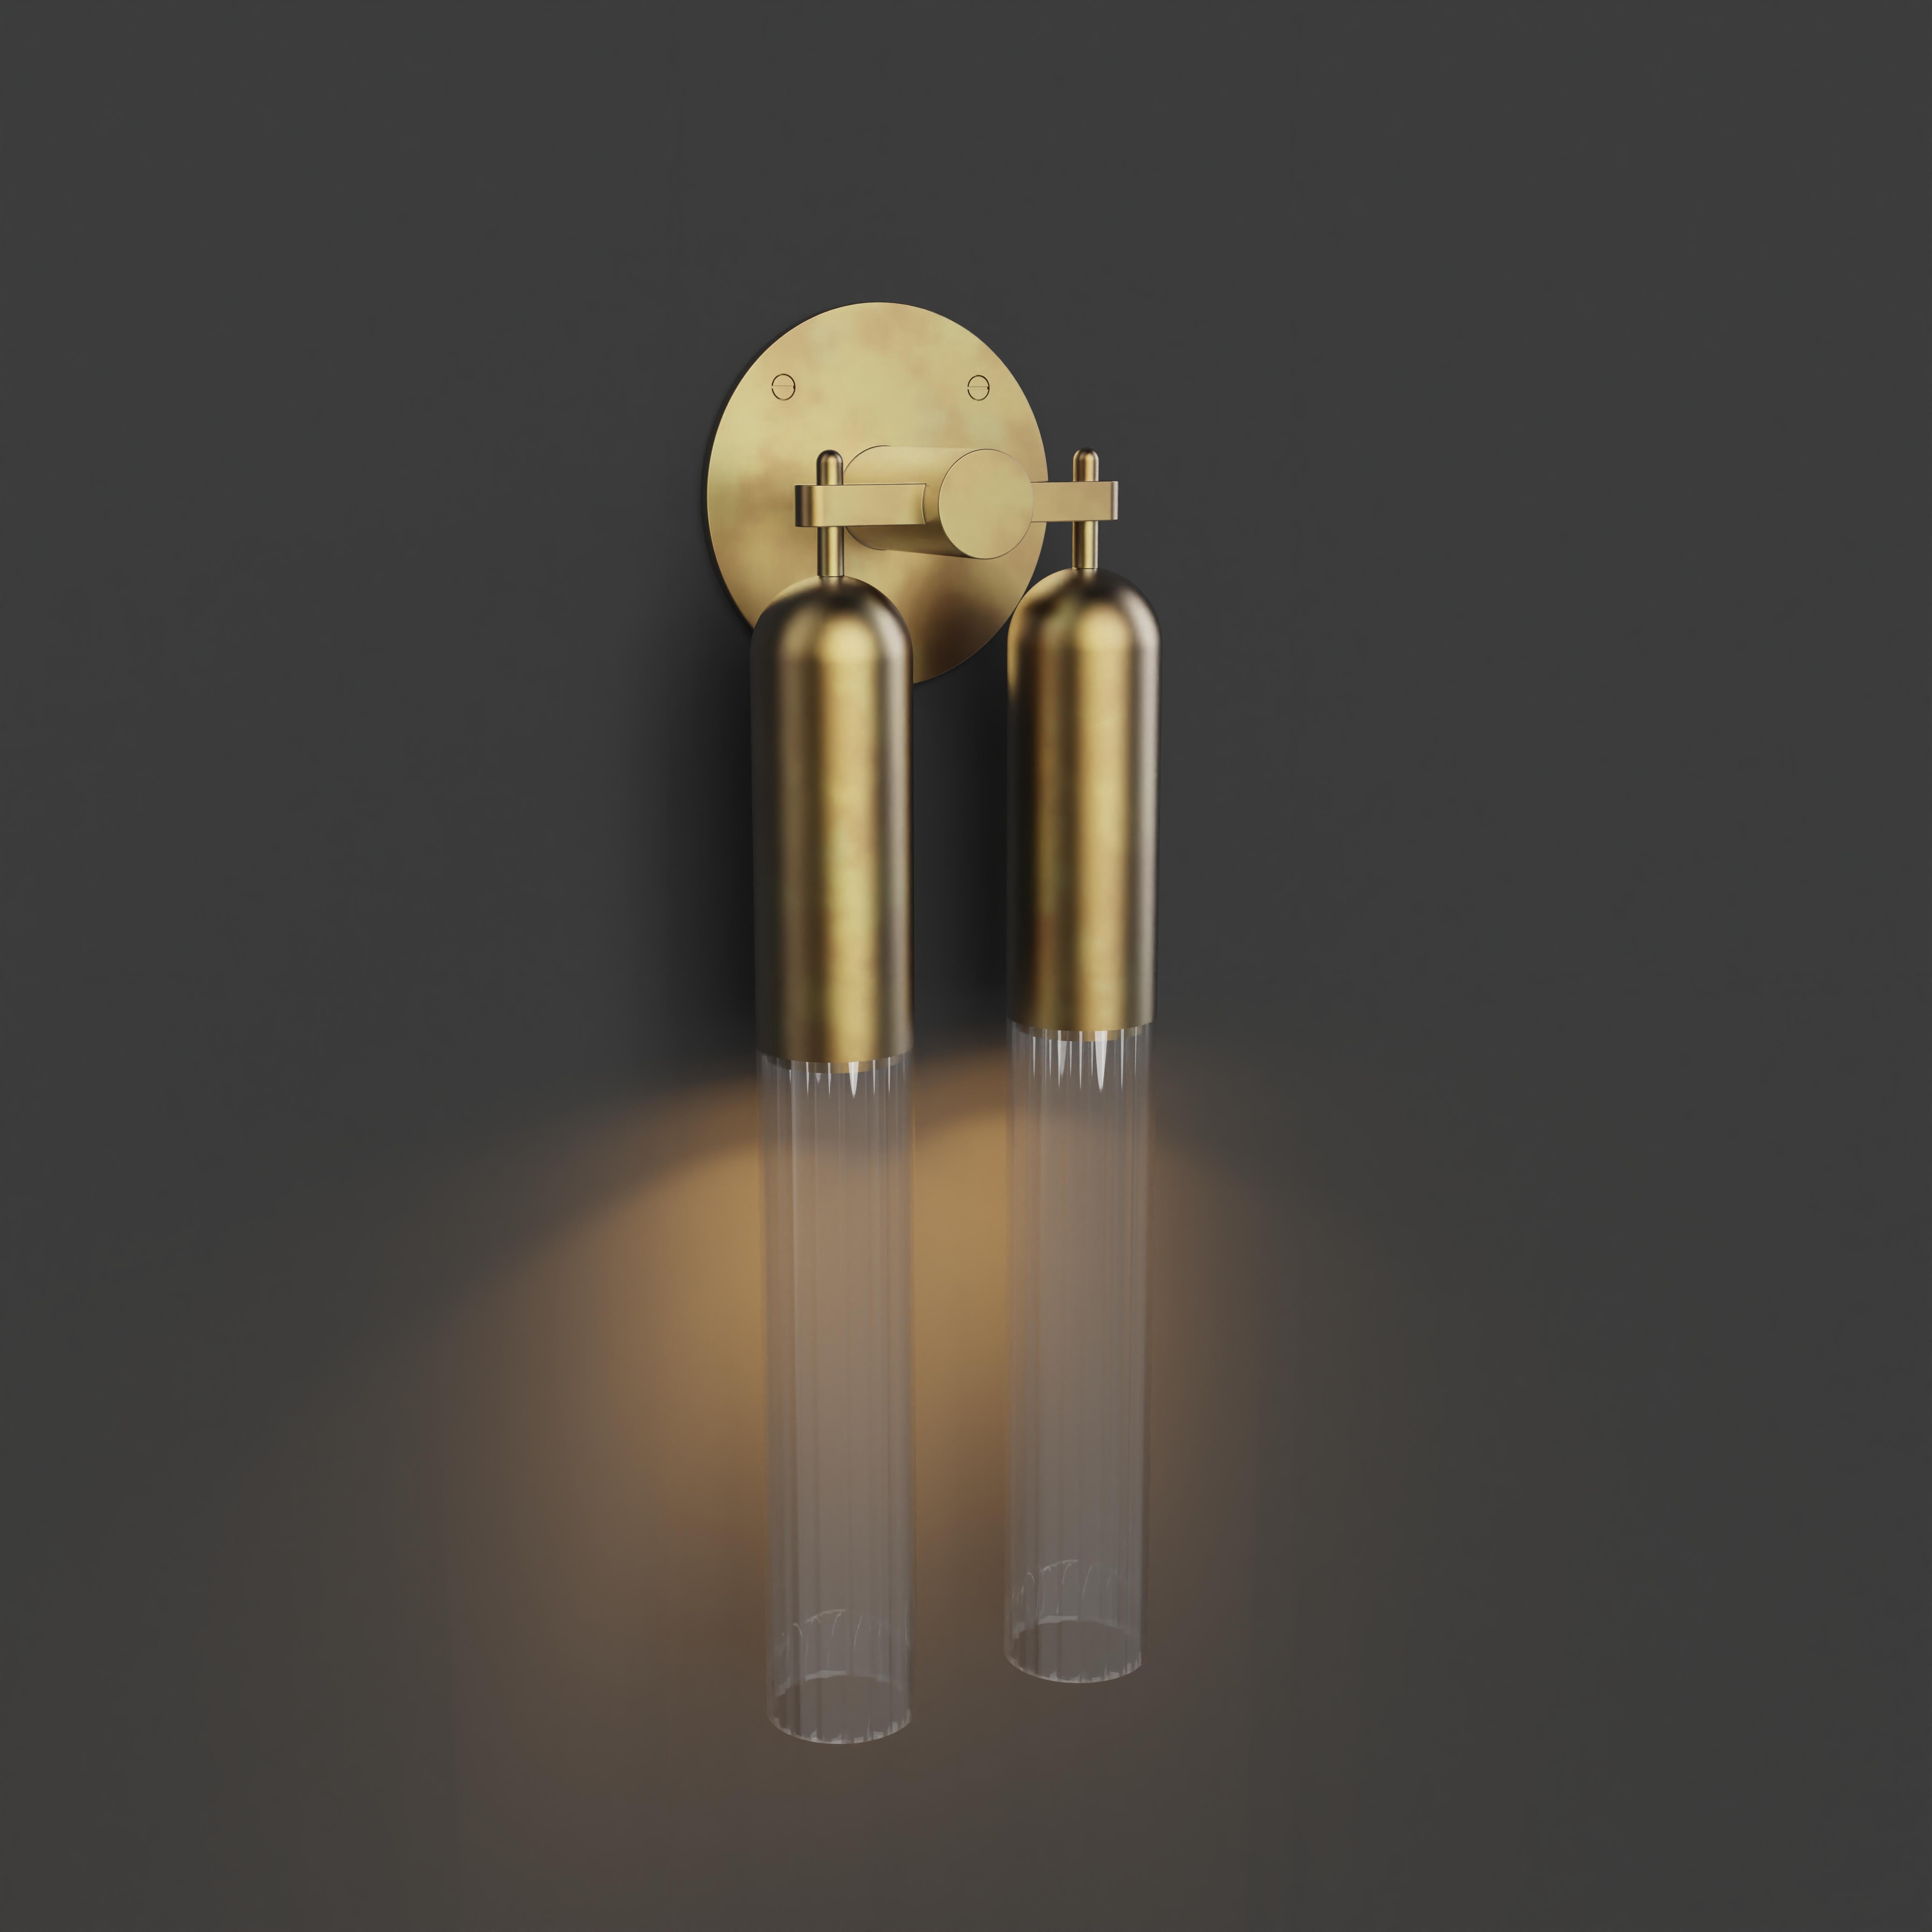 Double Wall Light in brushed brass metal finish with fluted glass shade. 

Dimensions:
Overall Height: 500mm 
Glass Dia: 60mm 
Overall projection: 108mm 
Width: 160mm
Integrated LED

Made to order to buyer's specification. Variations to dimensions